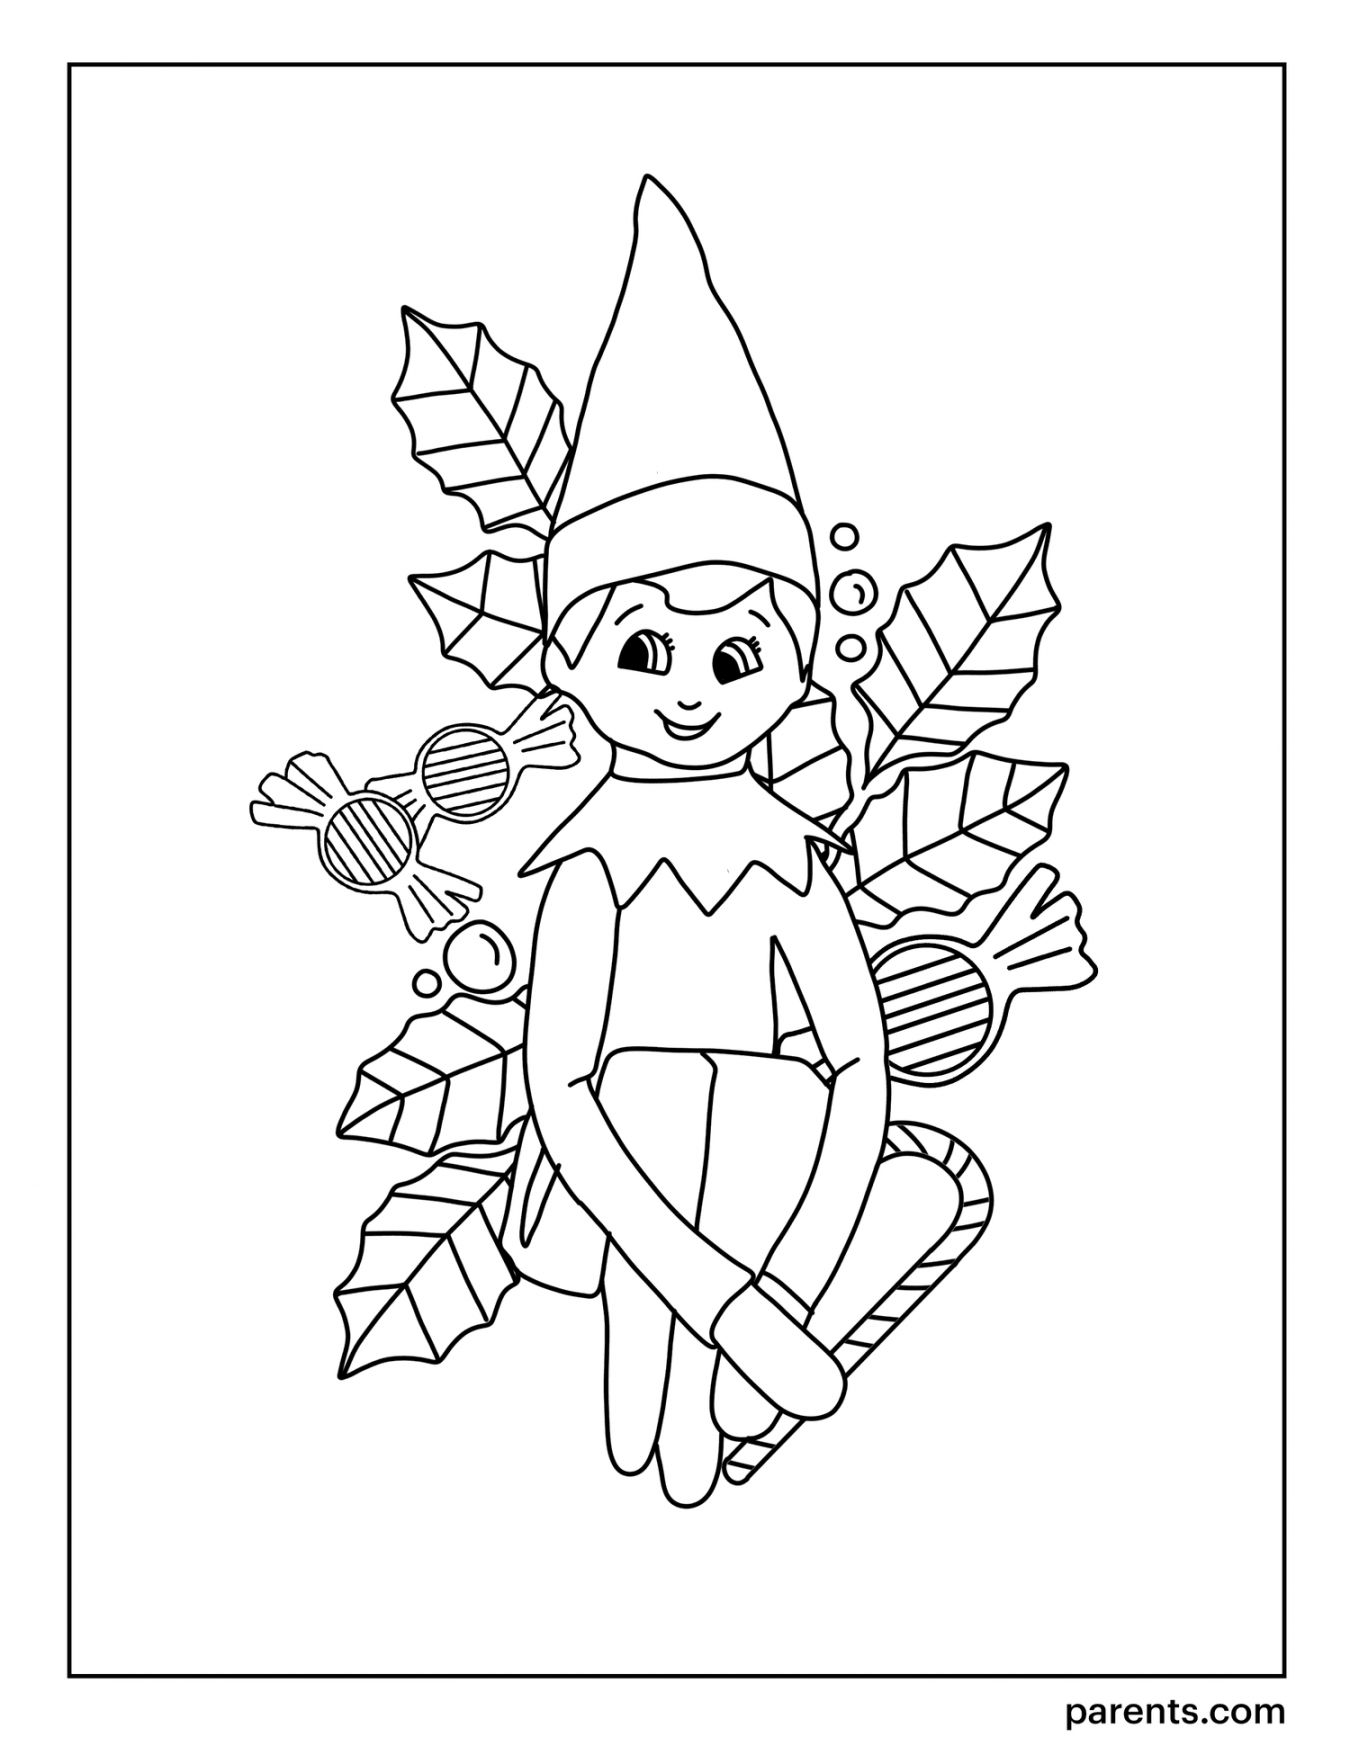 Elf on the Shelf Inspired Coloring Pages for Kids - FREE Printables - Free Printable Elf On The Shelf Coloring Pages